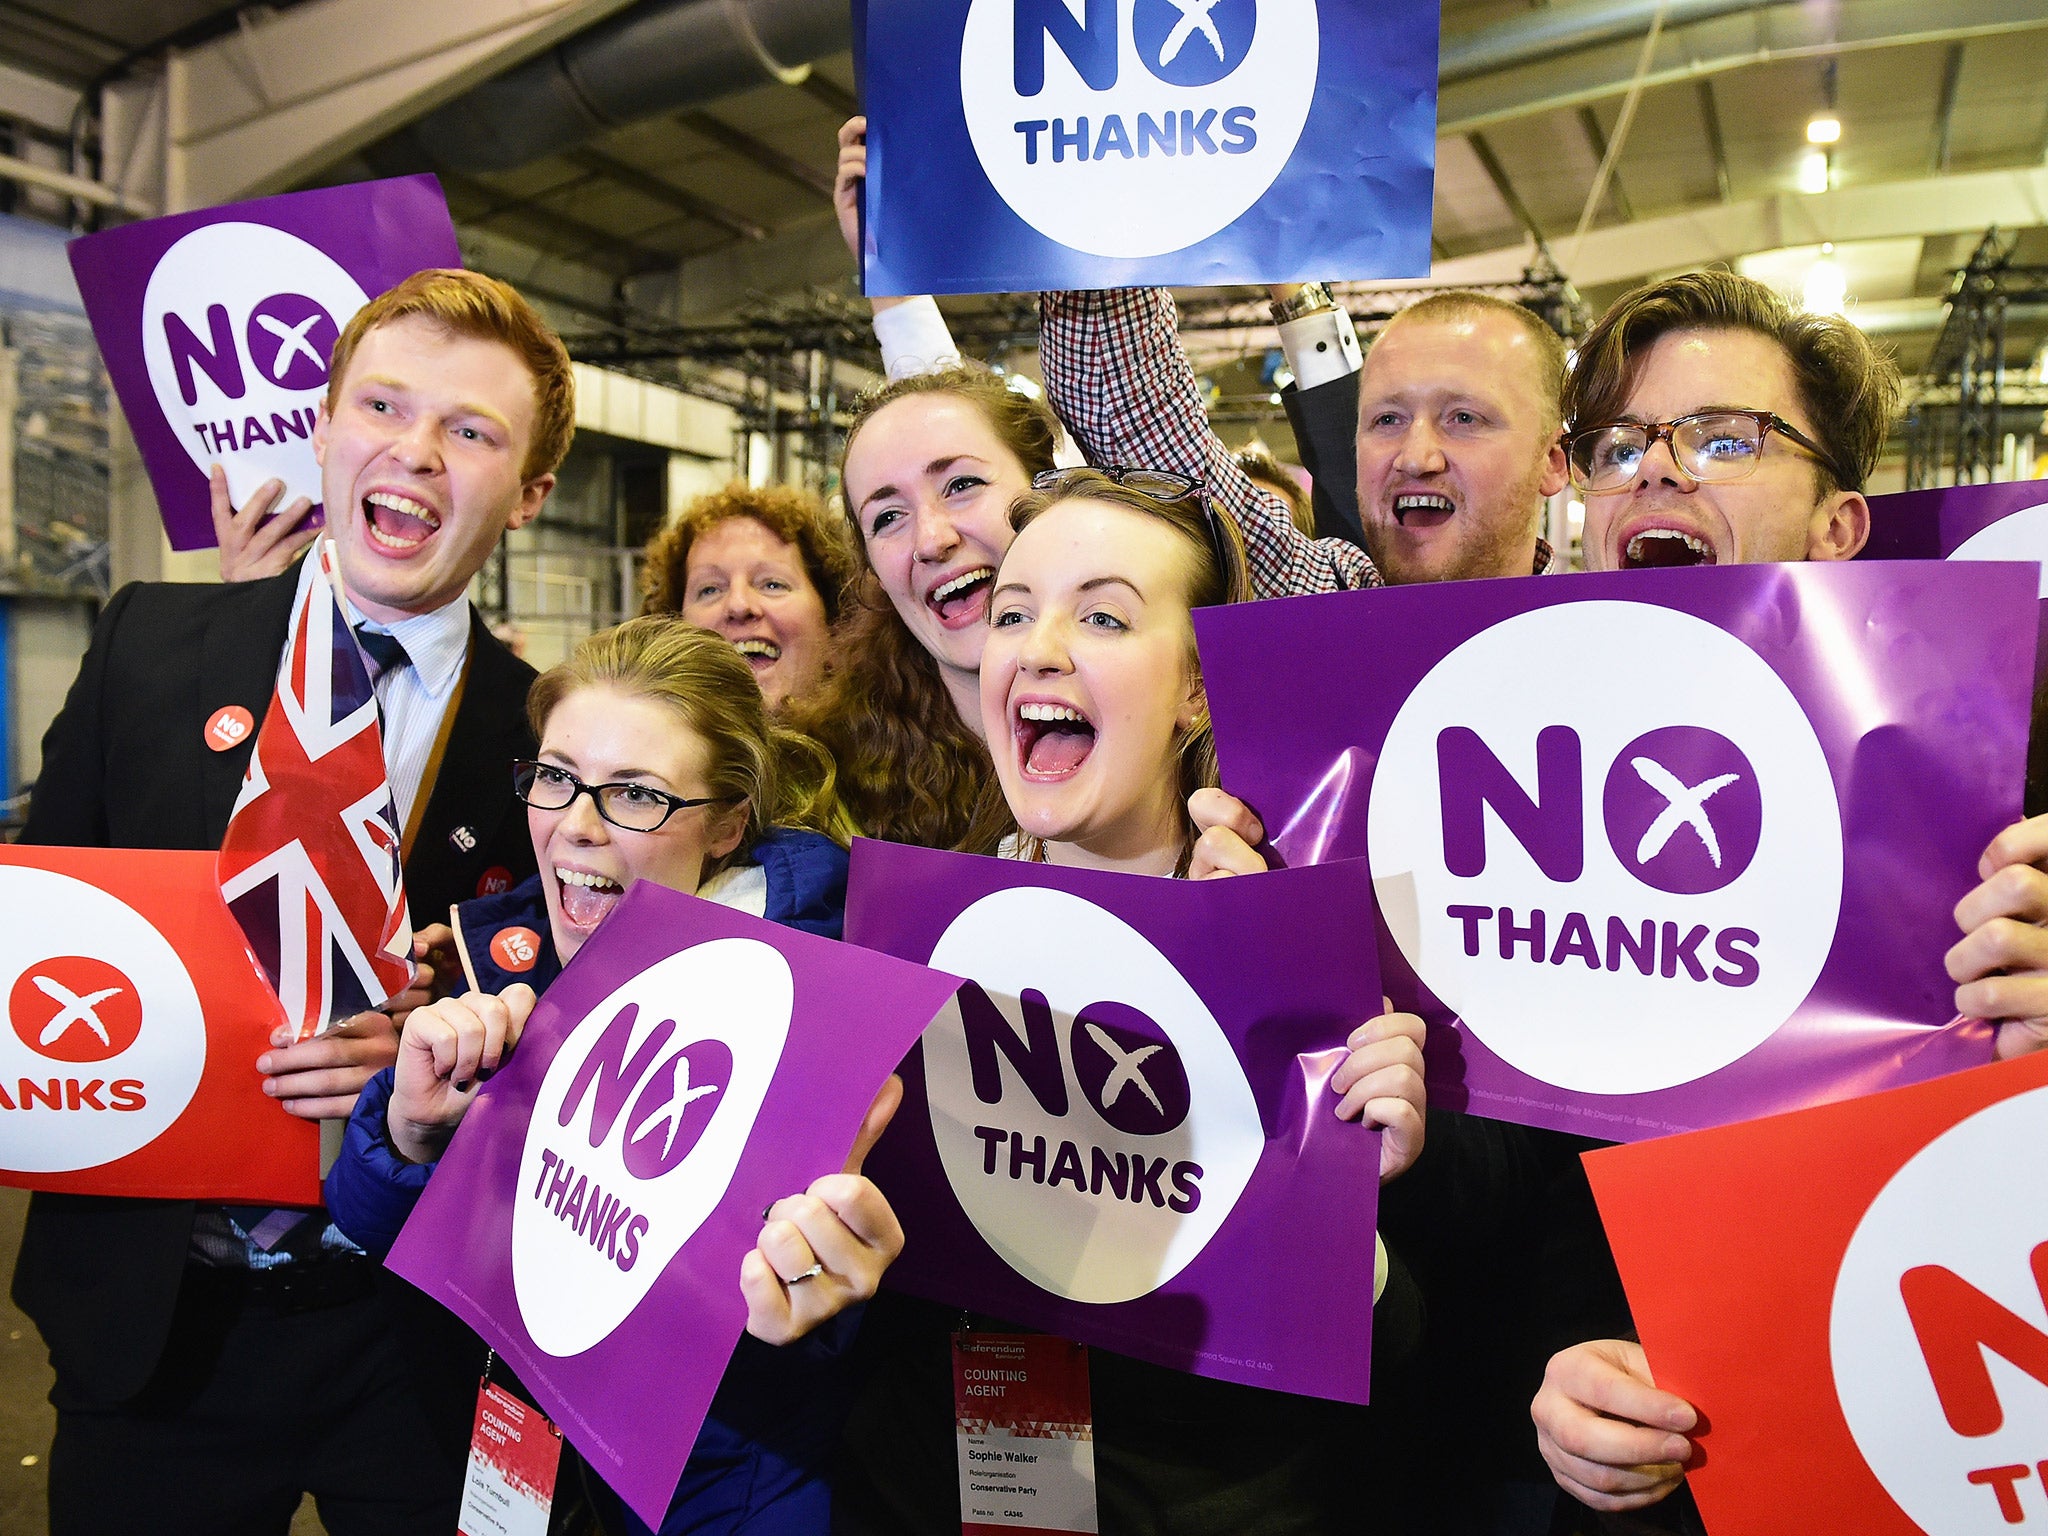 Supporters for the 'Better Together' campaign celebrate following last year's Scottish referendum